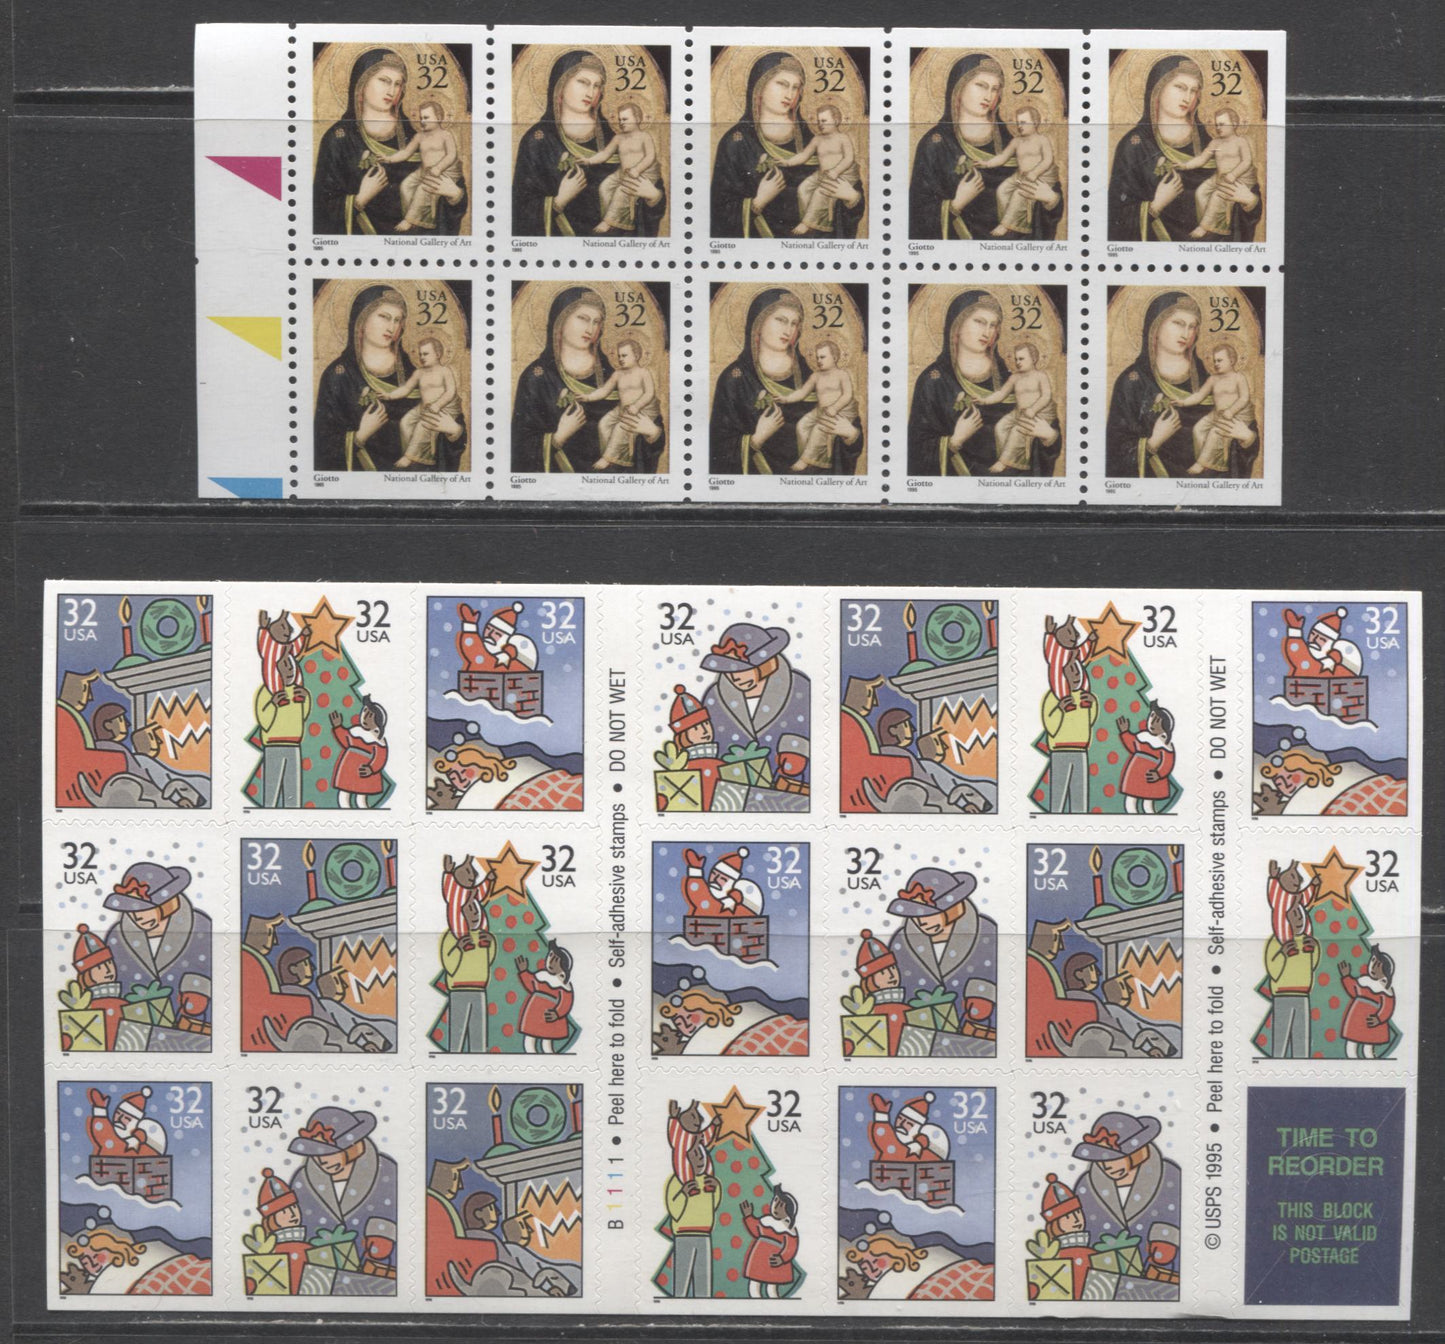 Lot 104 United States SC#3003Ab/3112a 1995-1996 Christmas Issues, 2 VFNH Blocks Of 10 & 20, Click on Listing to See ALL Pictures, 2017 Scott Cat. $19.5